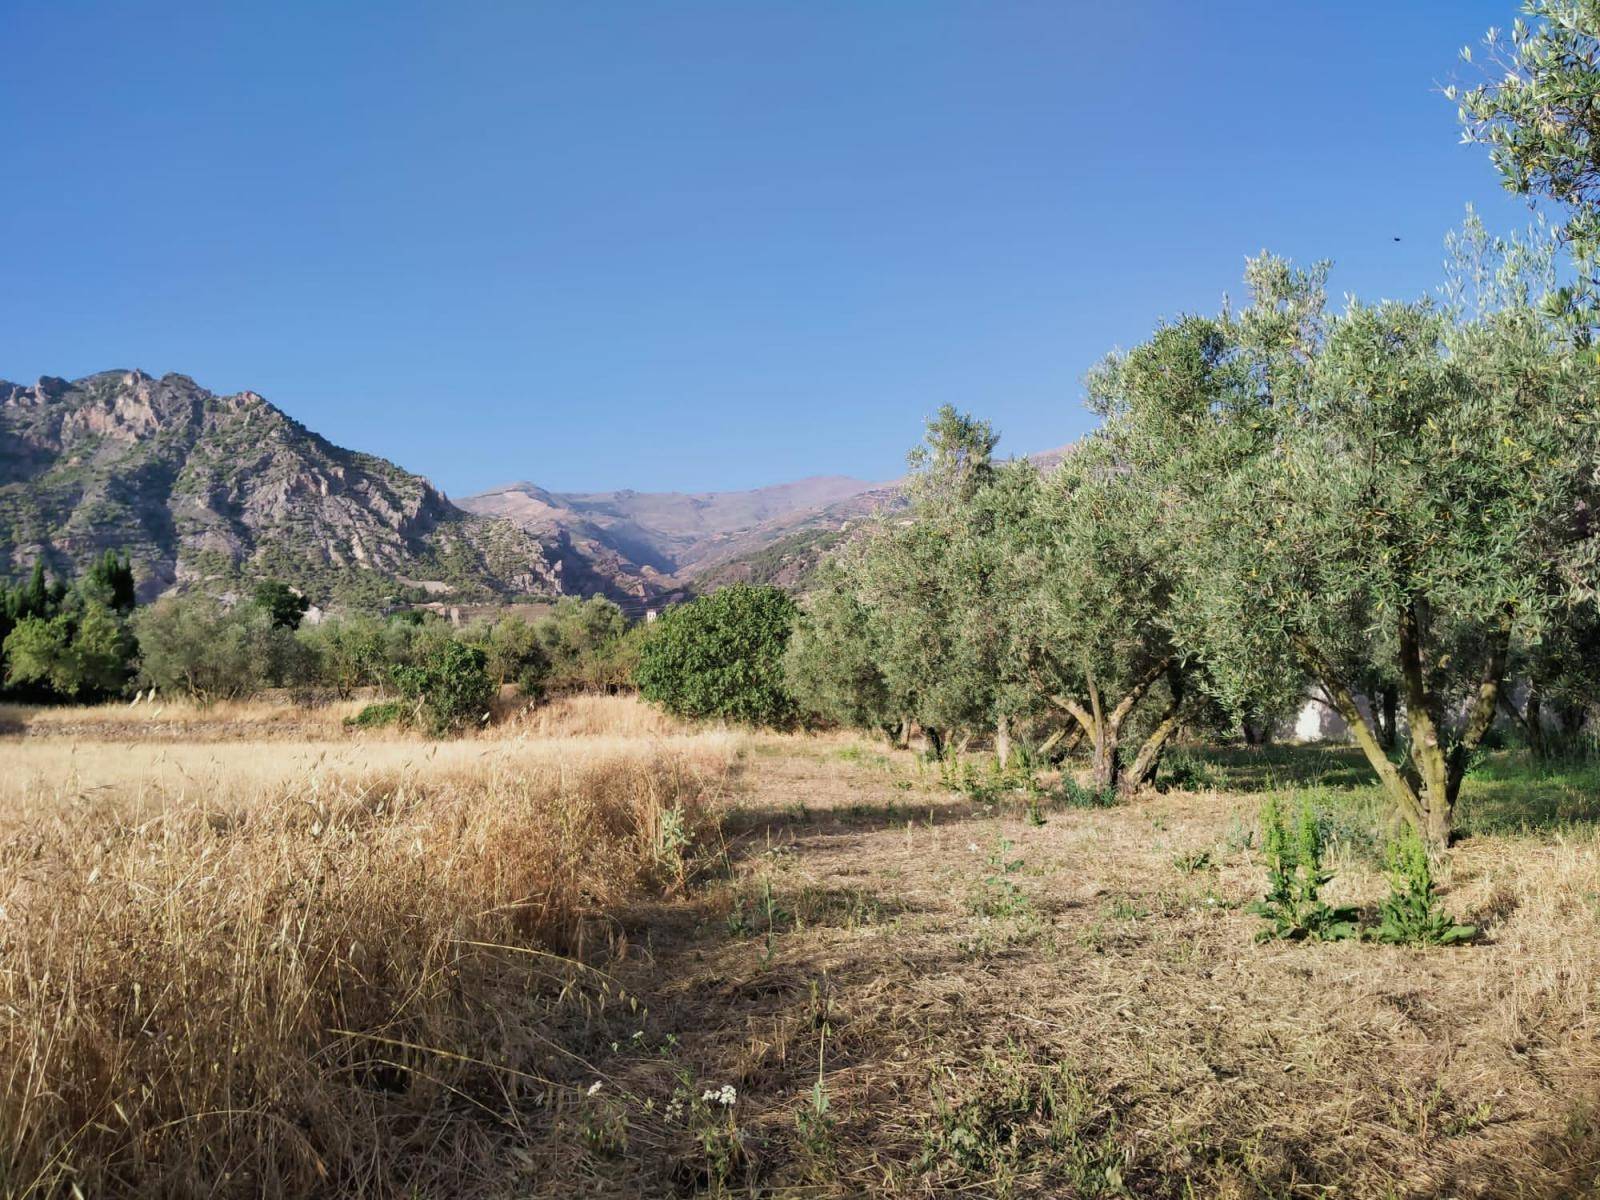 Plot for sale with amazing mountain views, and a step away from the village